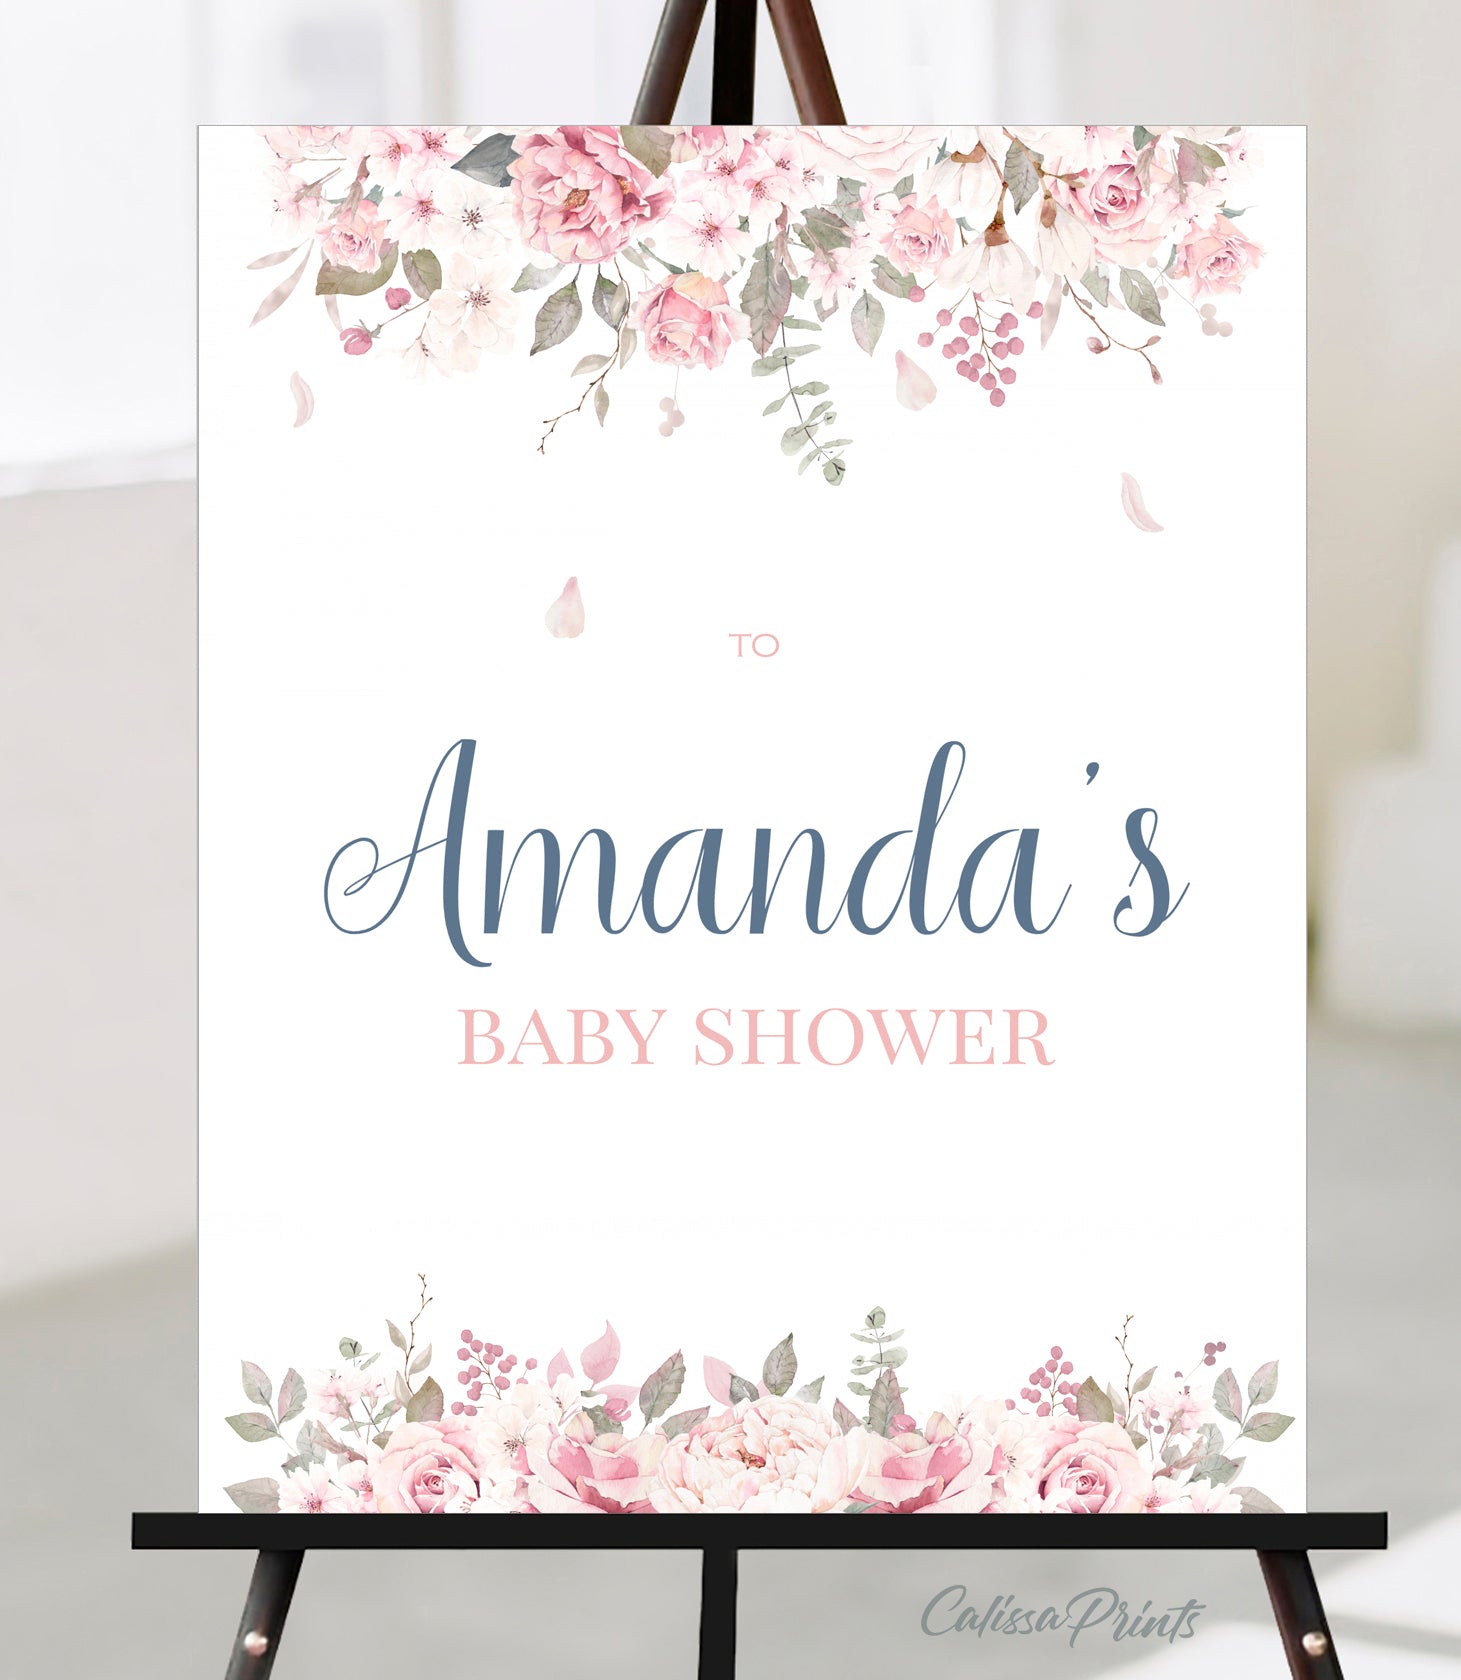 Baby Shower Welcome Signs Templates, Pretty Rose Design - BABY13